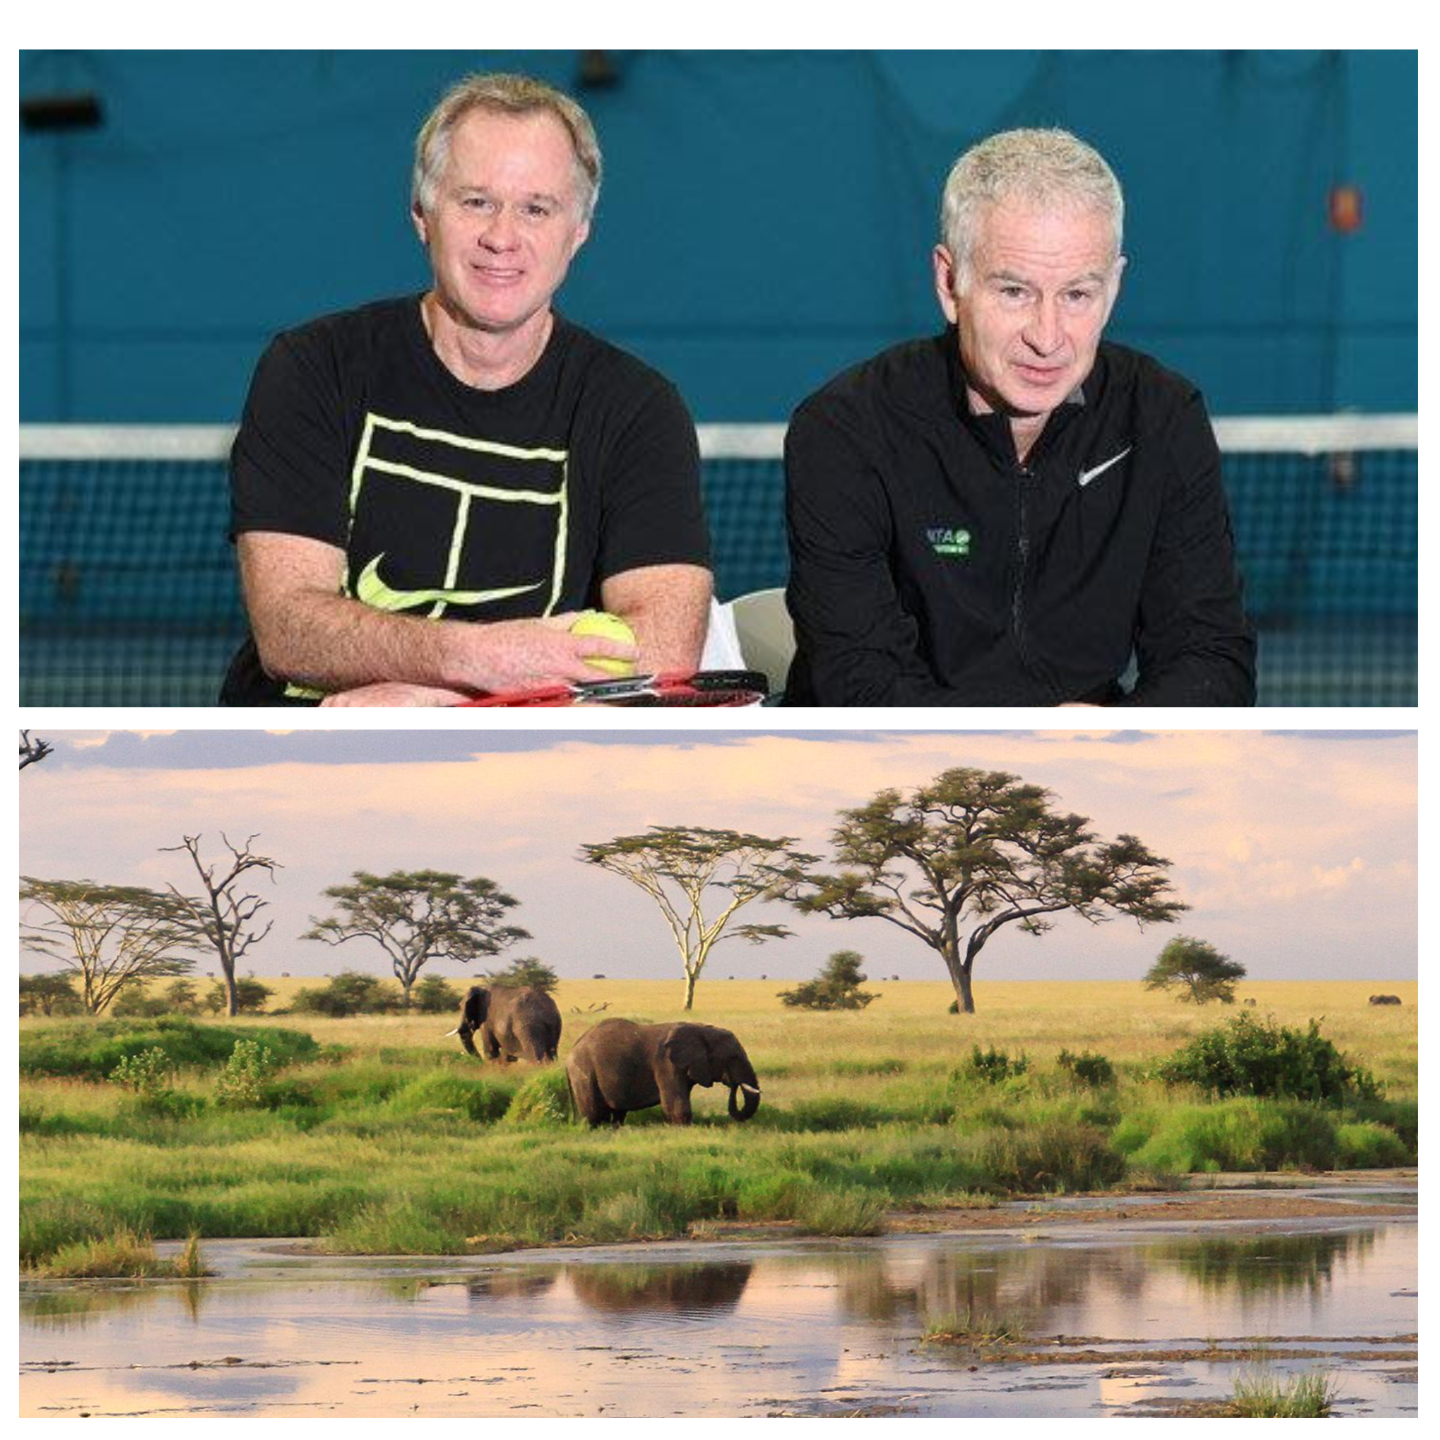 John McEnroe, Patrick McEnroe and Insider Expeditions Invite You For Tennis In Tanzania